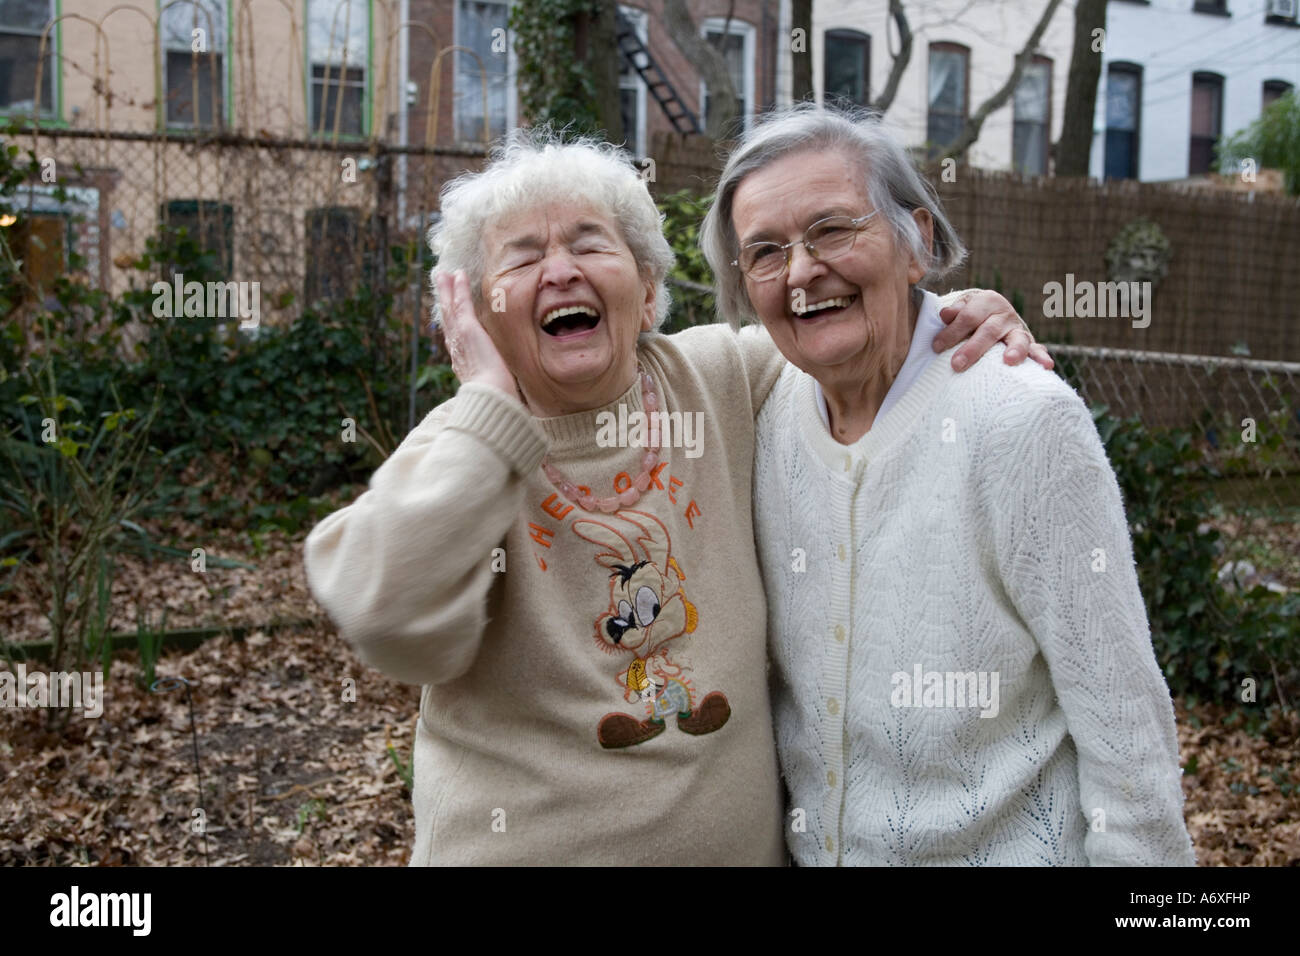 Sisters, 93 (L) and 90 years old Stock Photo